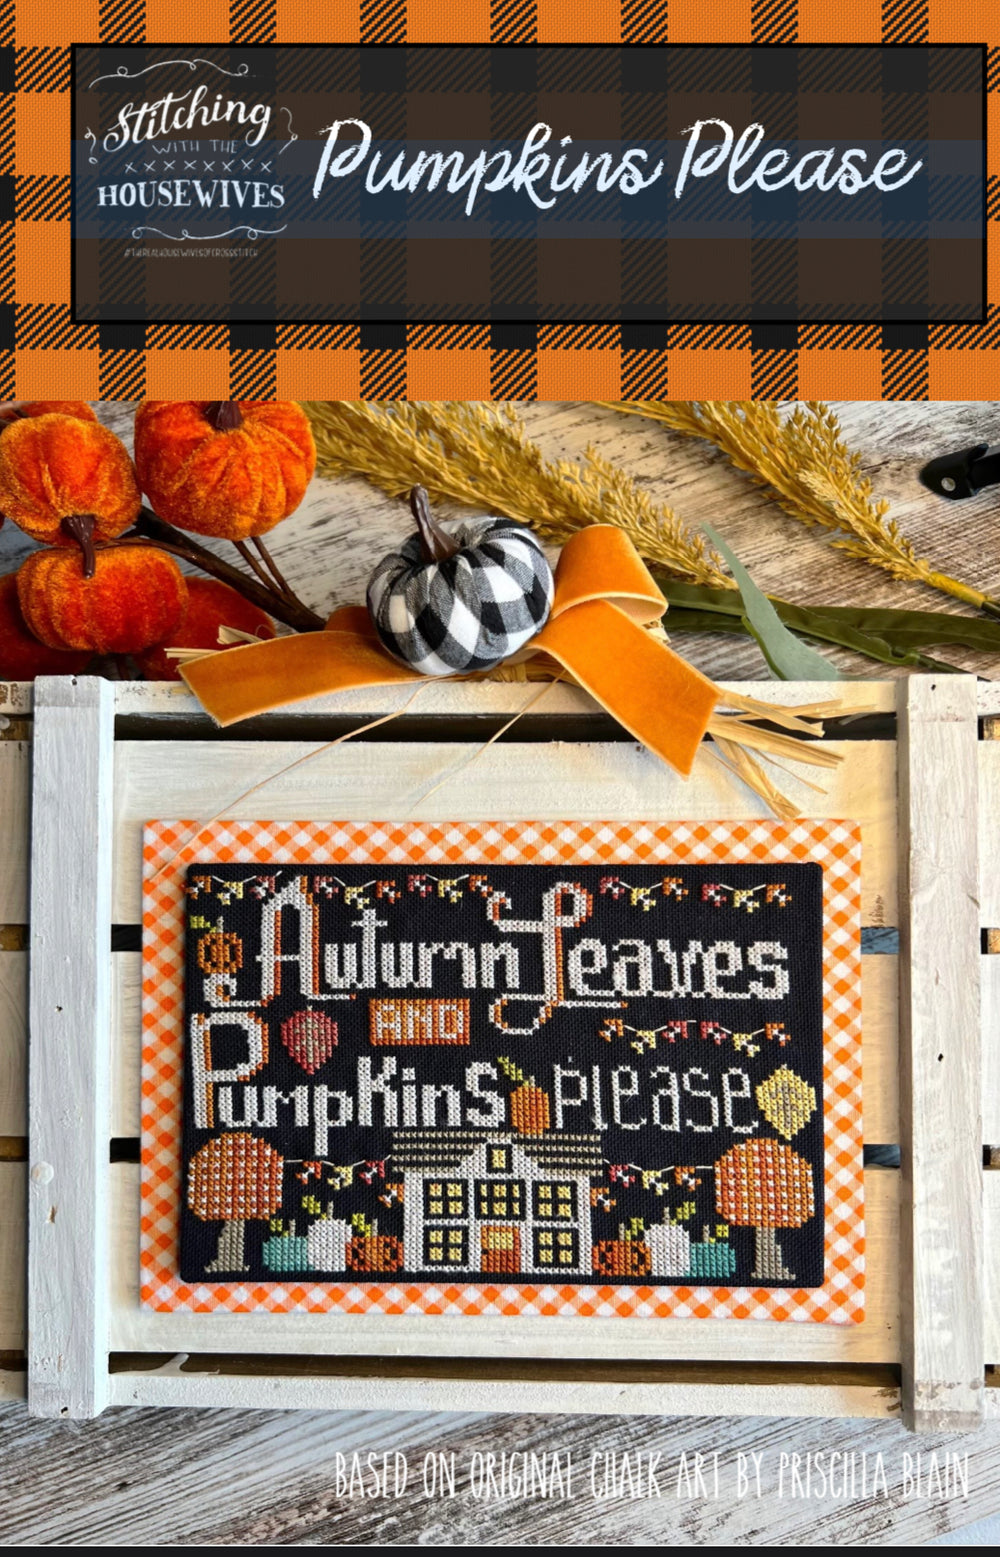 Pumpkins Please by Stitching with the Housewives